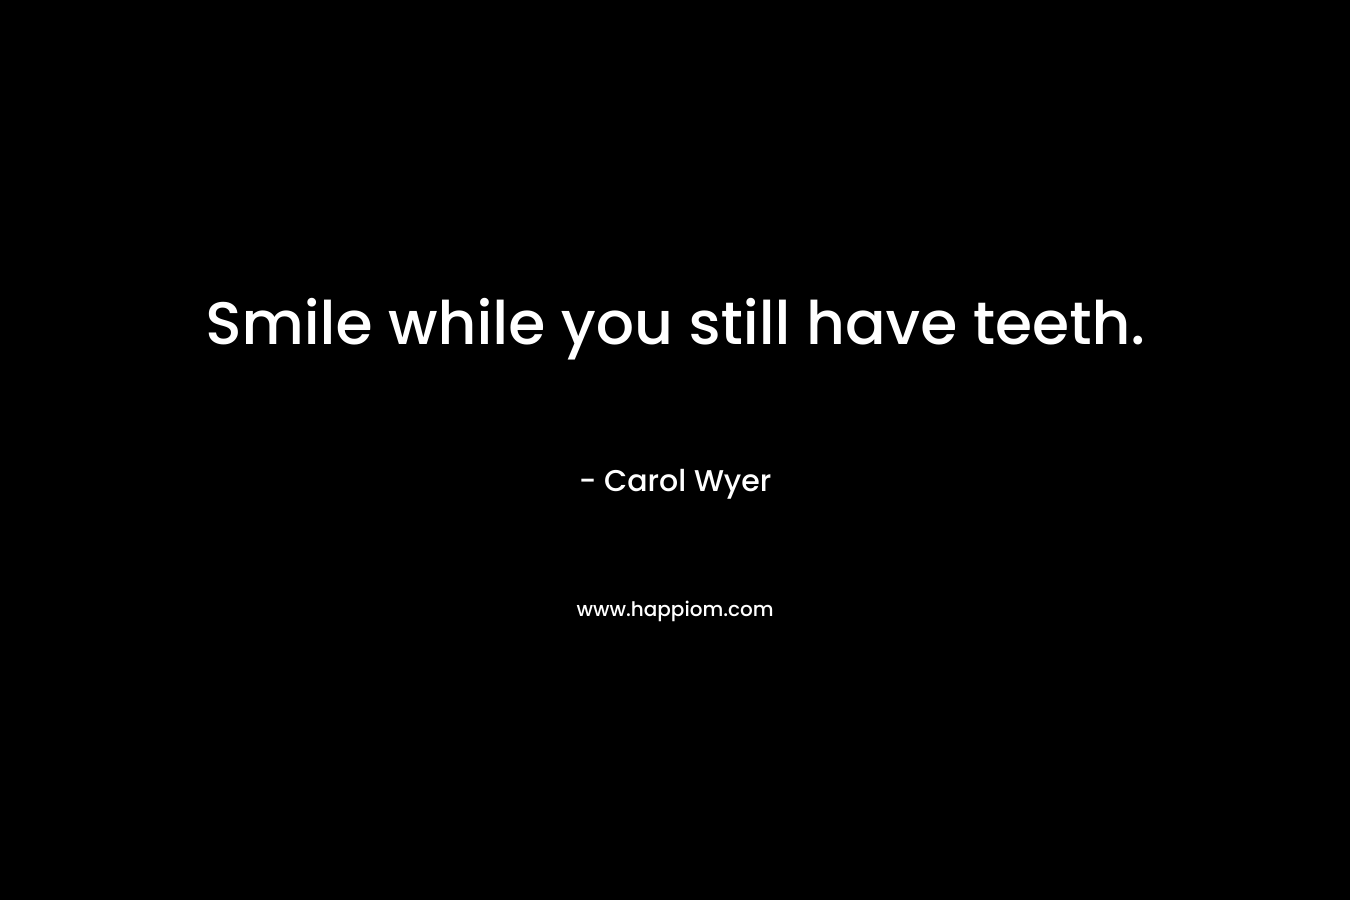 Smile while you still have teeth.